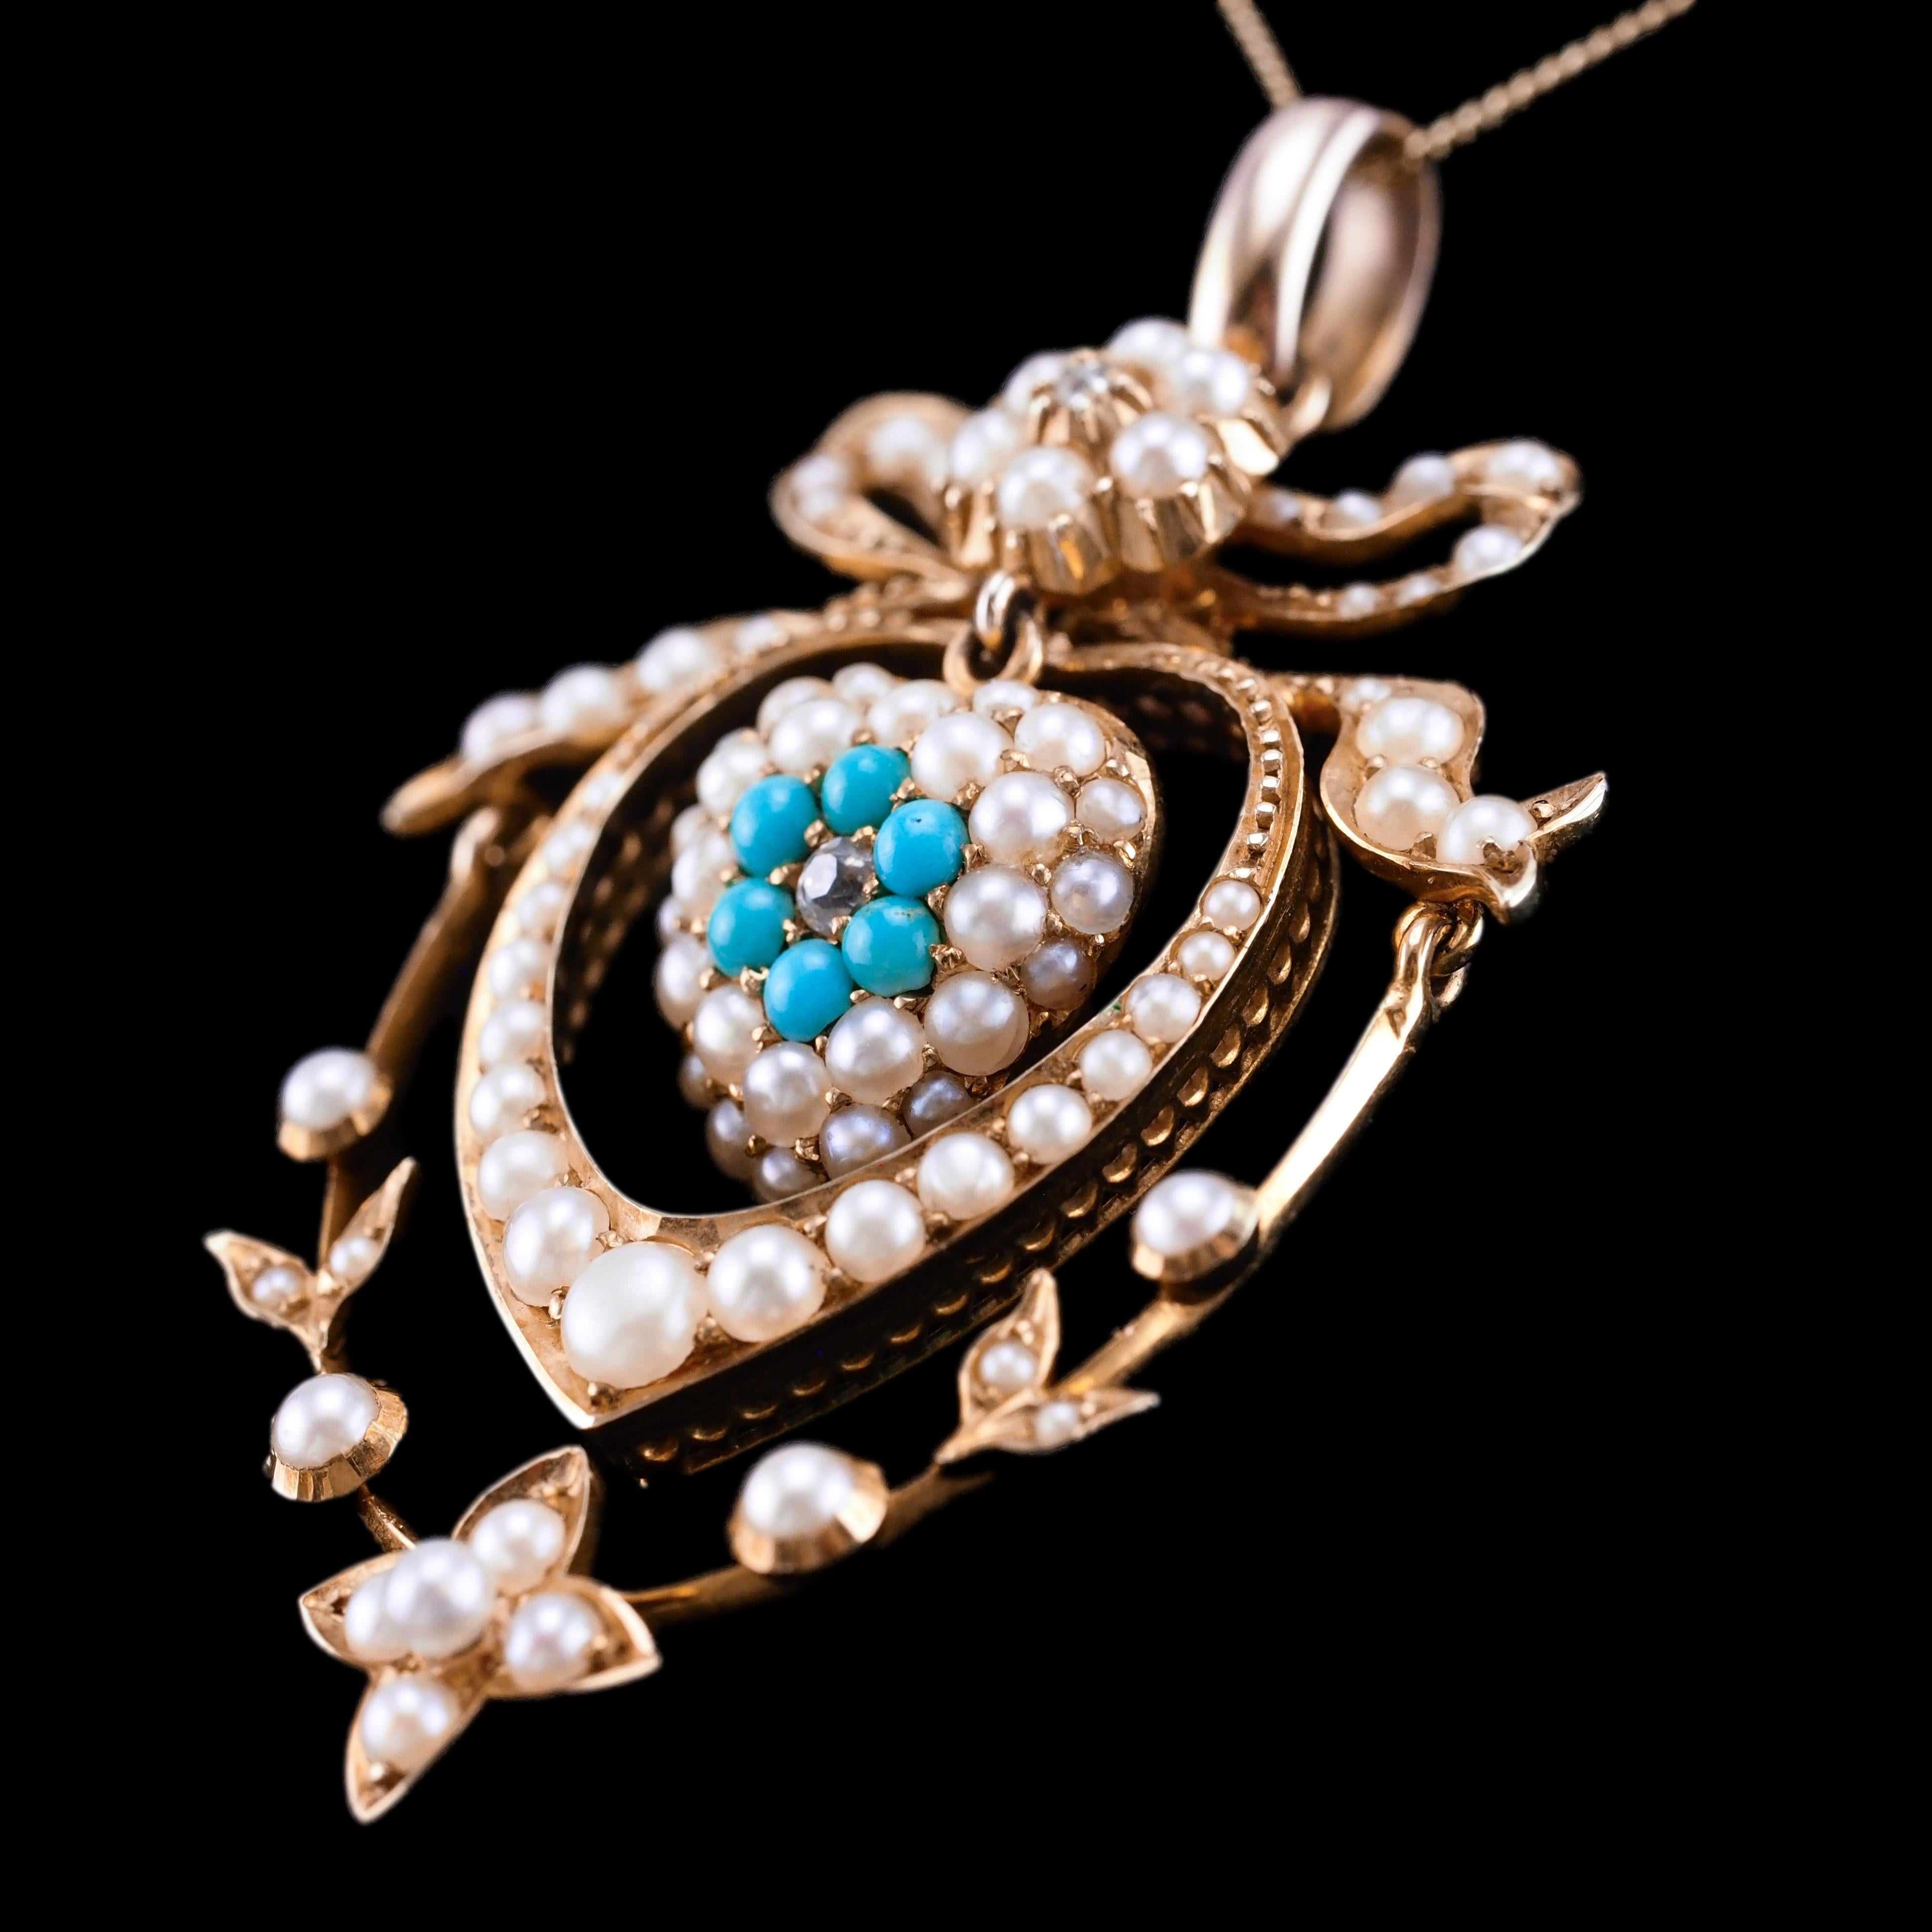 Antique Edwardian 15K Gold Turquoise Diamond & Seed Pearl Pendant Necklace c1910 For Sale 6